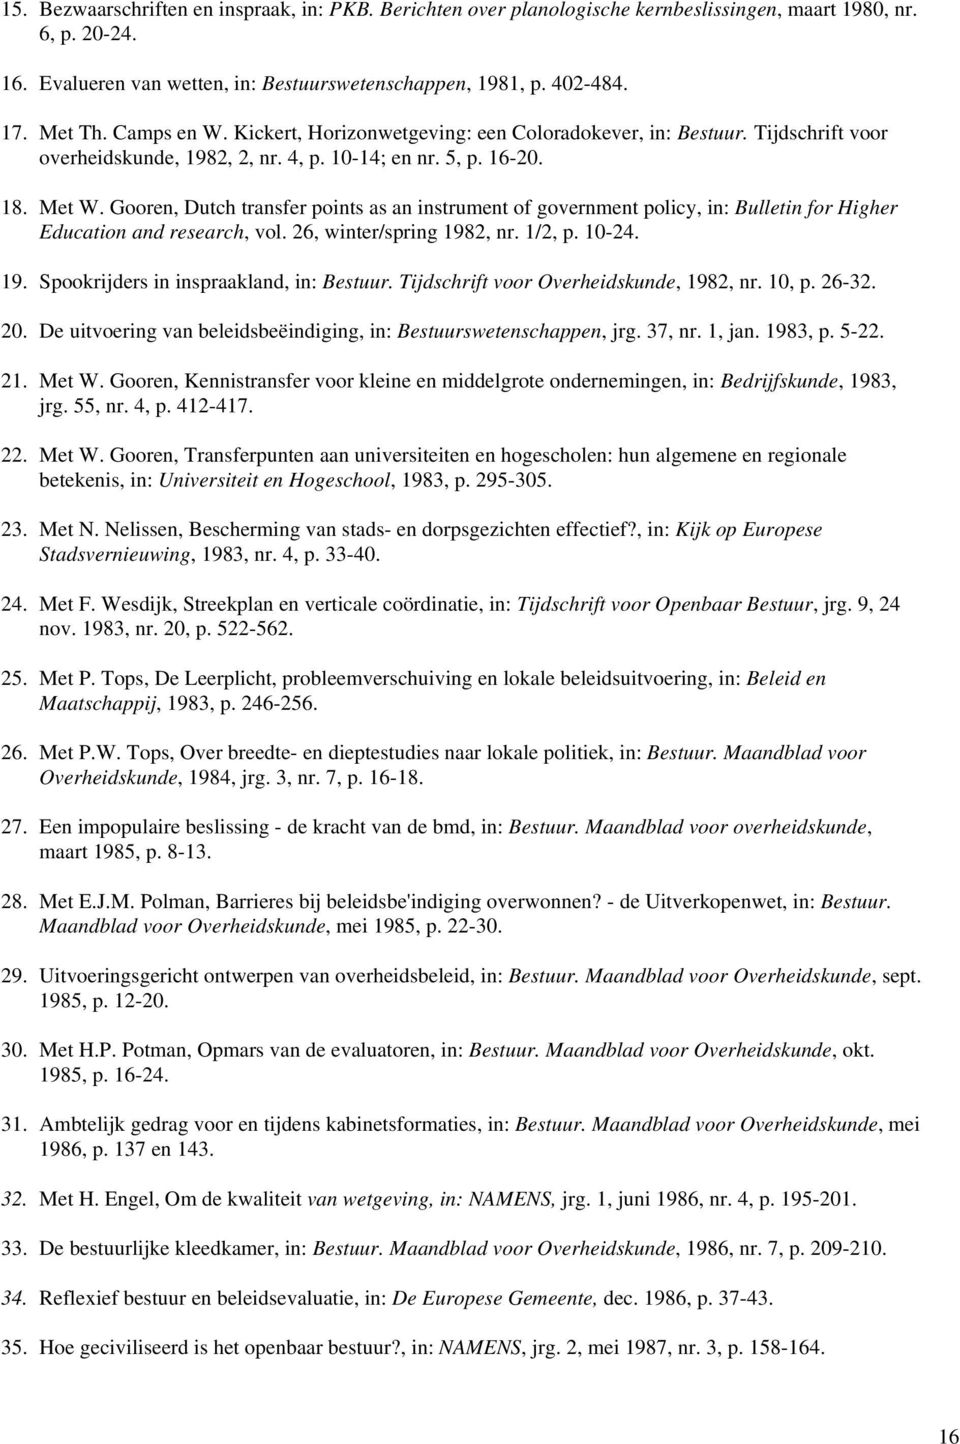 Gooren, Dutch transfer points as an instrument of government policy, in: Bulletin for Higher Education and research, vol. 26, winter/spring 1982, nr. 1/2, p. 10-24. 19. Spookrijders in inspraakland, in: Bestuur.